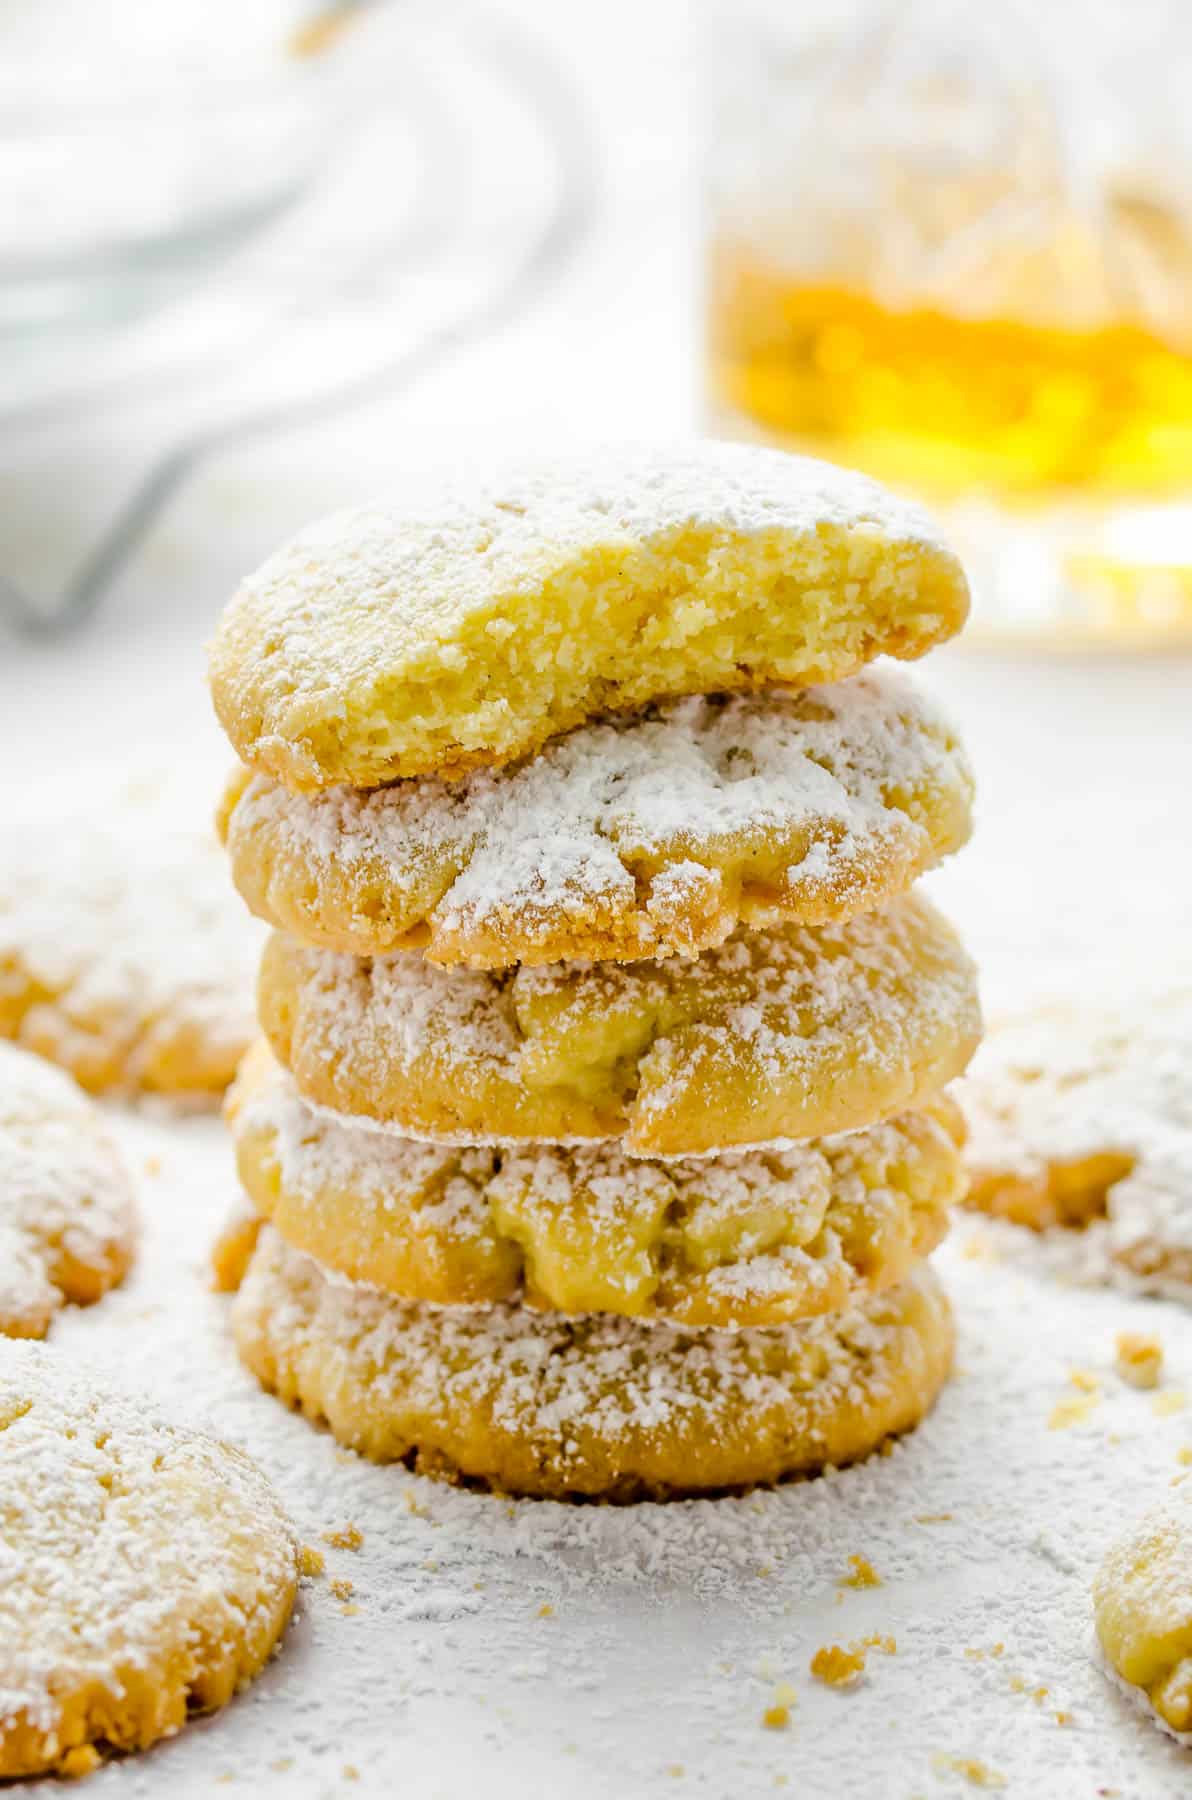 A stack of baked Gurabii shortbread cookies, with a bite missing from the top cookie.